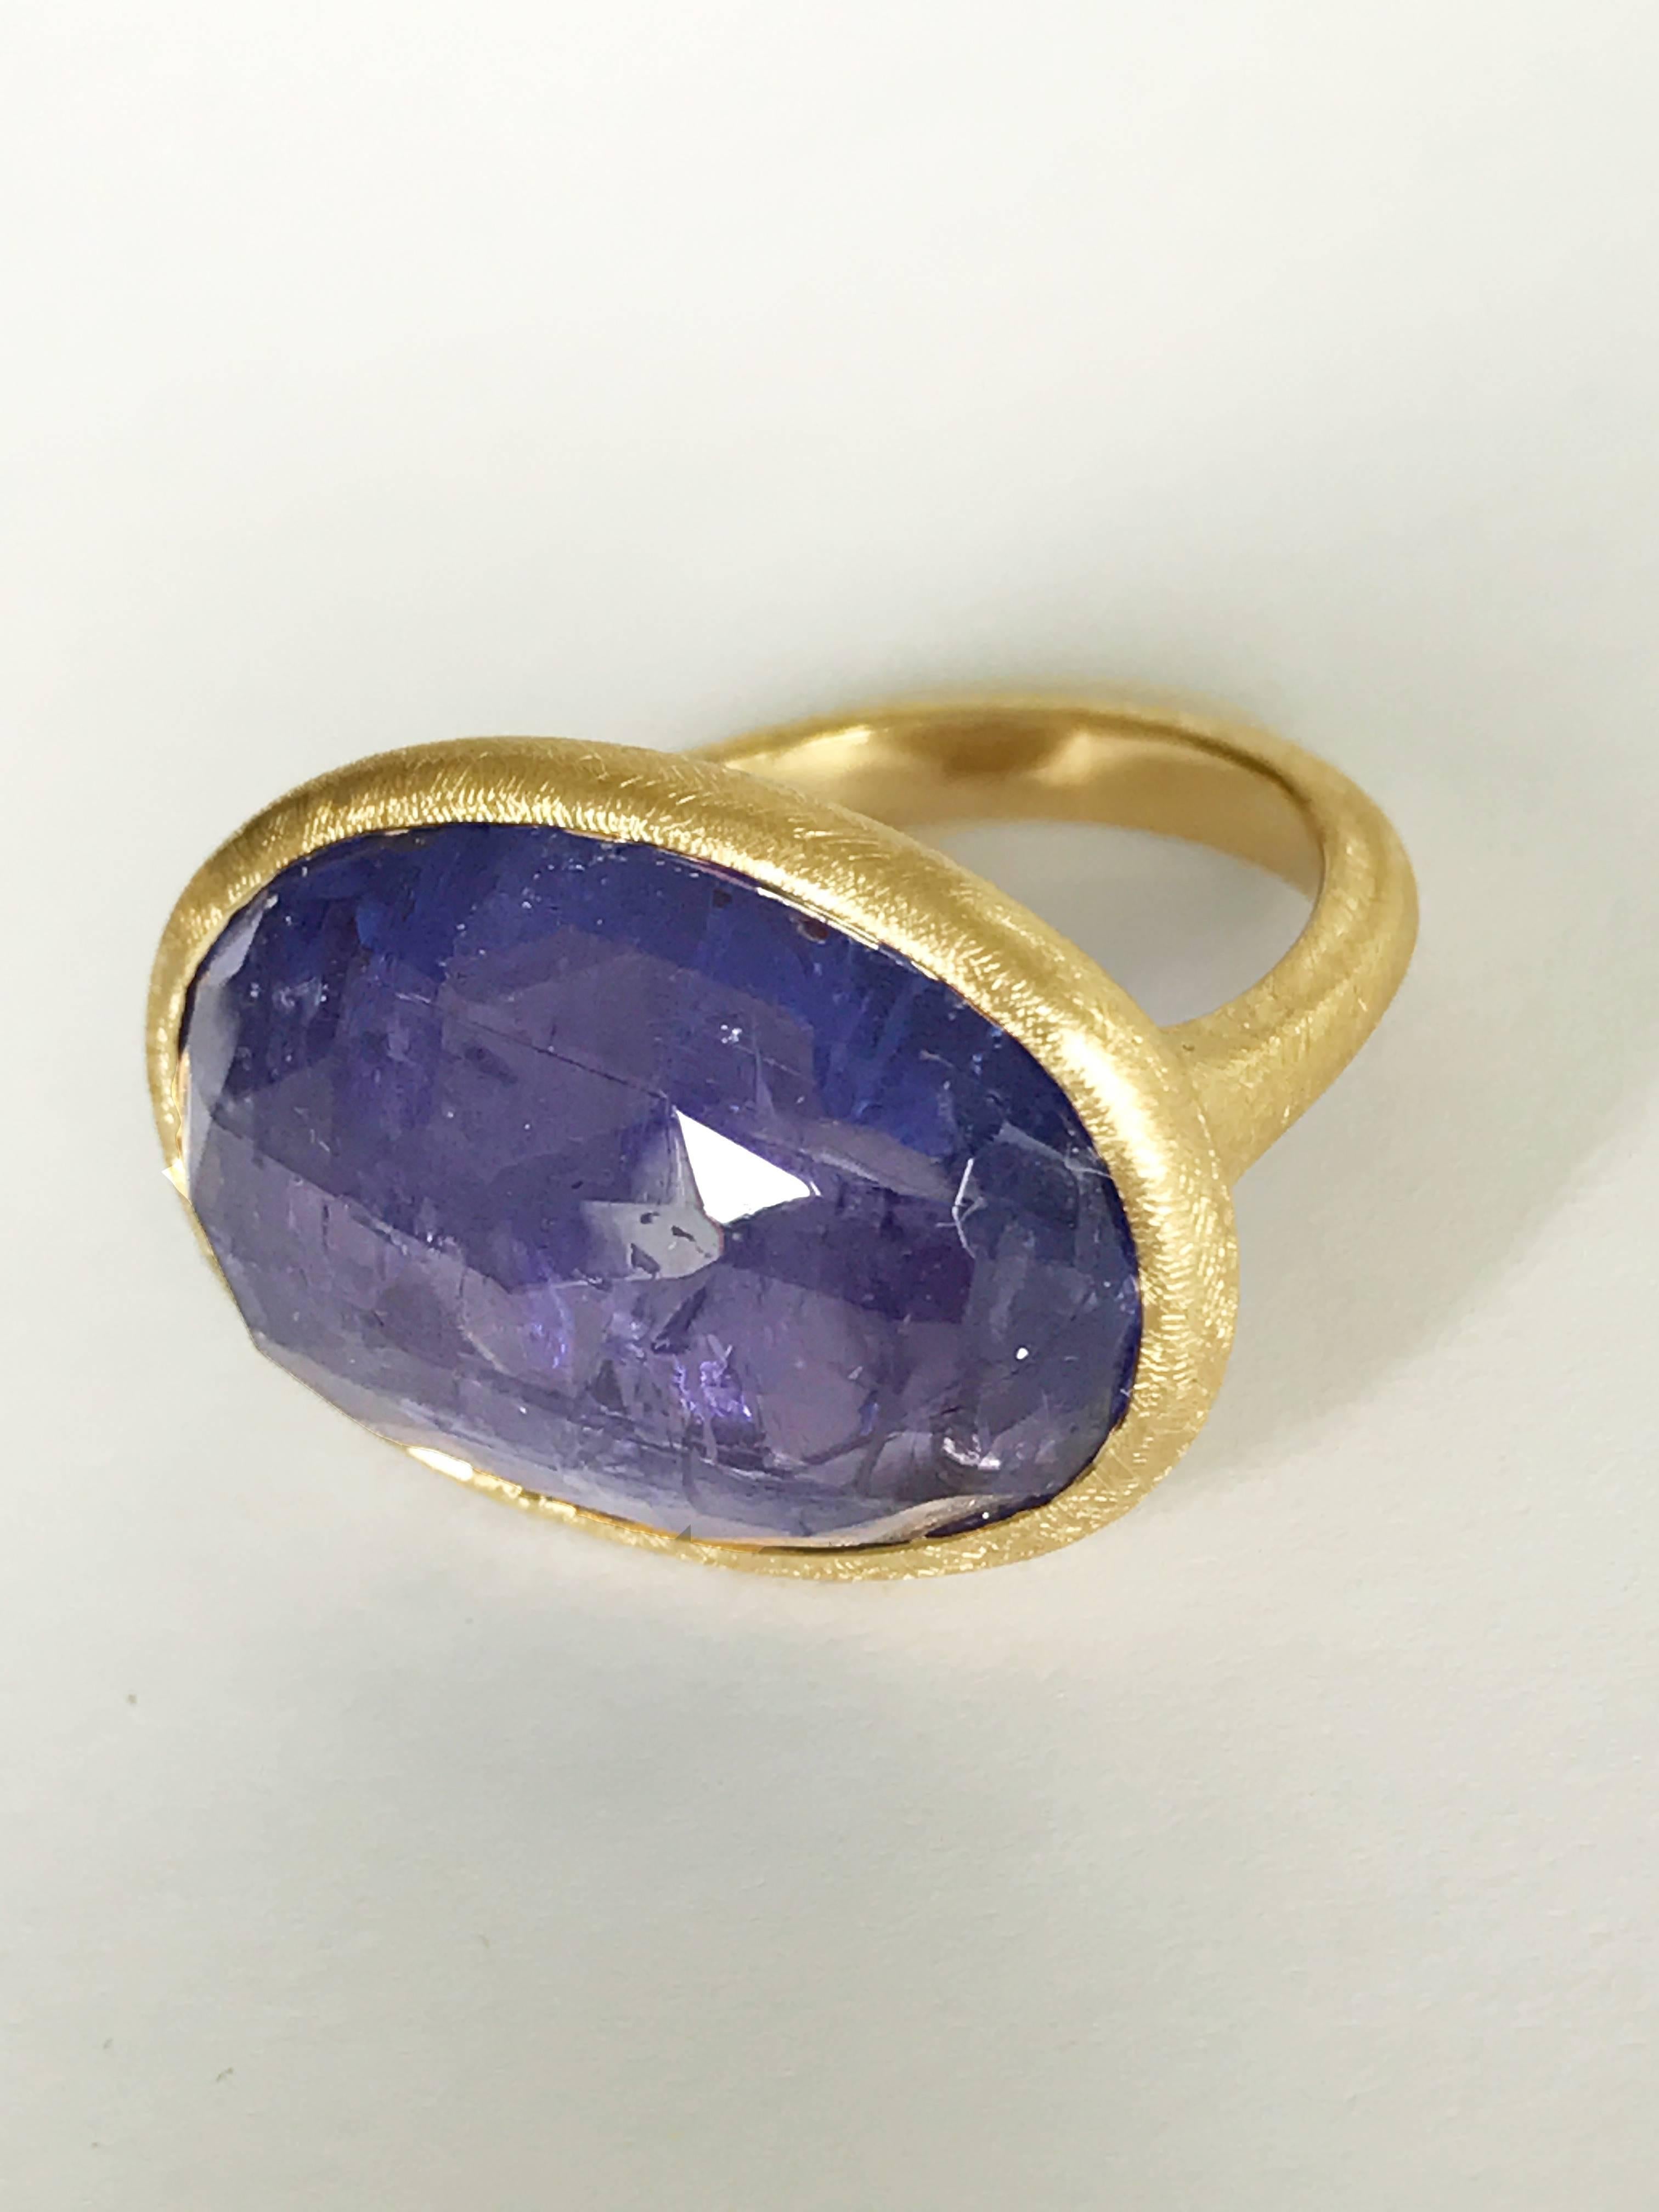 does tanzanite scratch easily